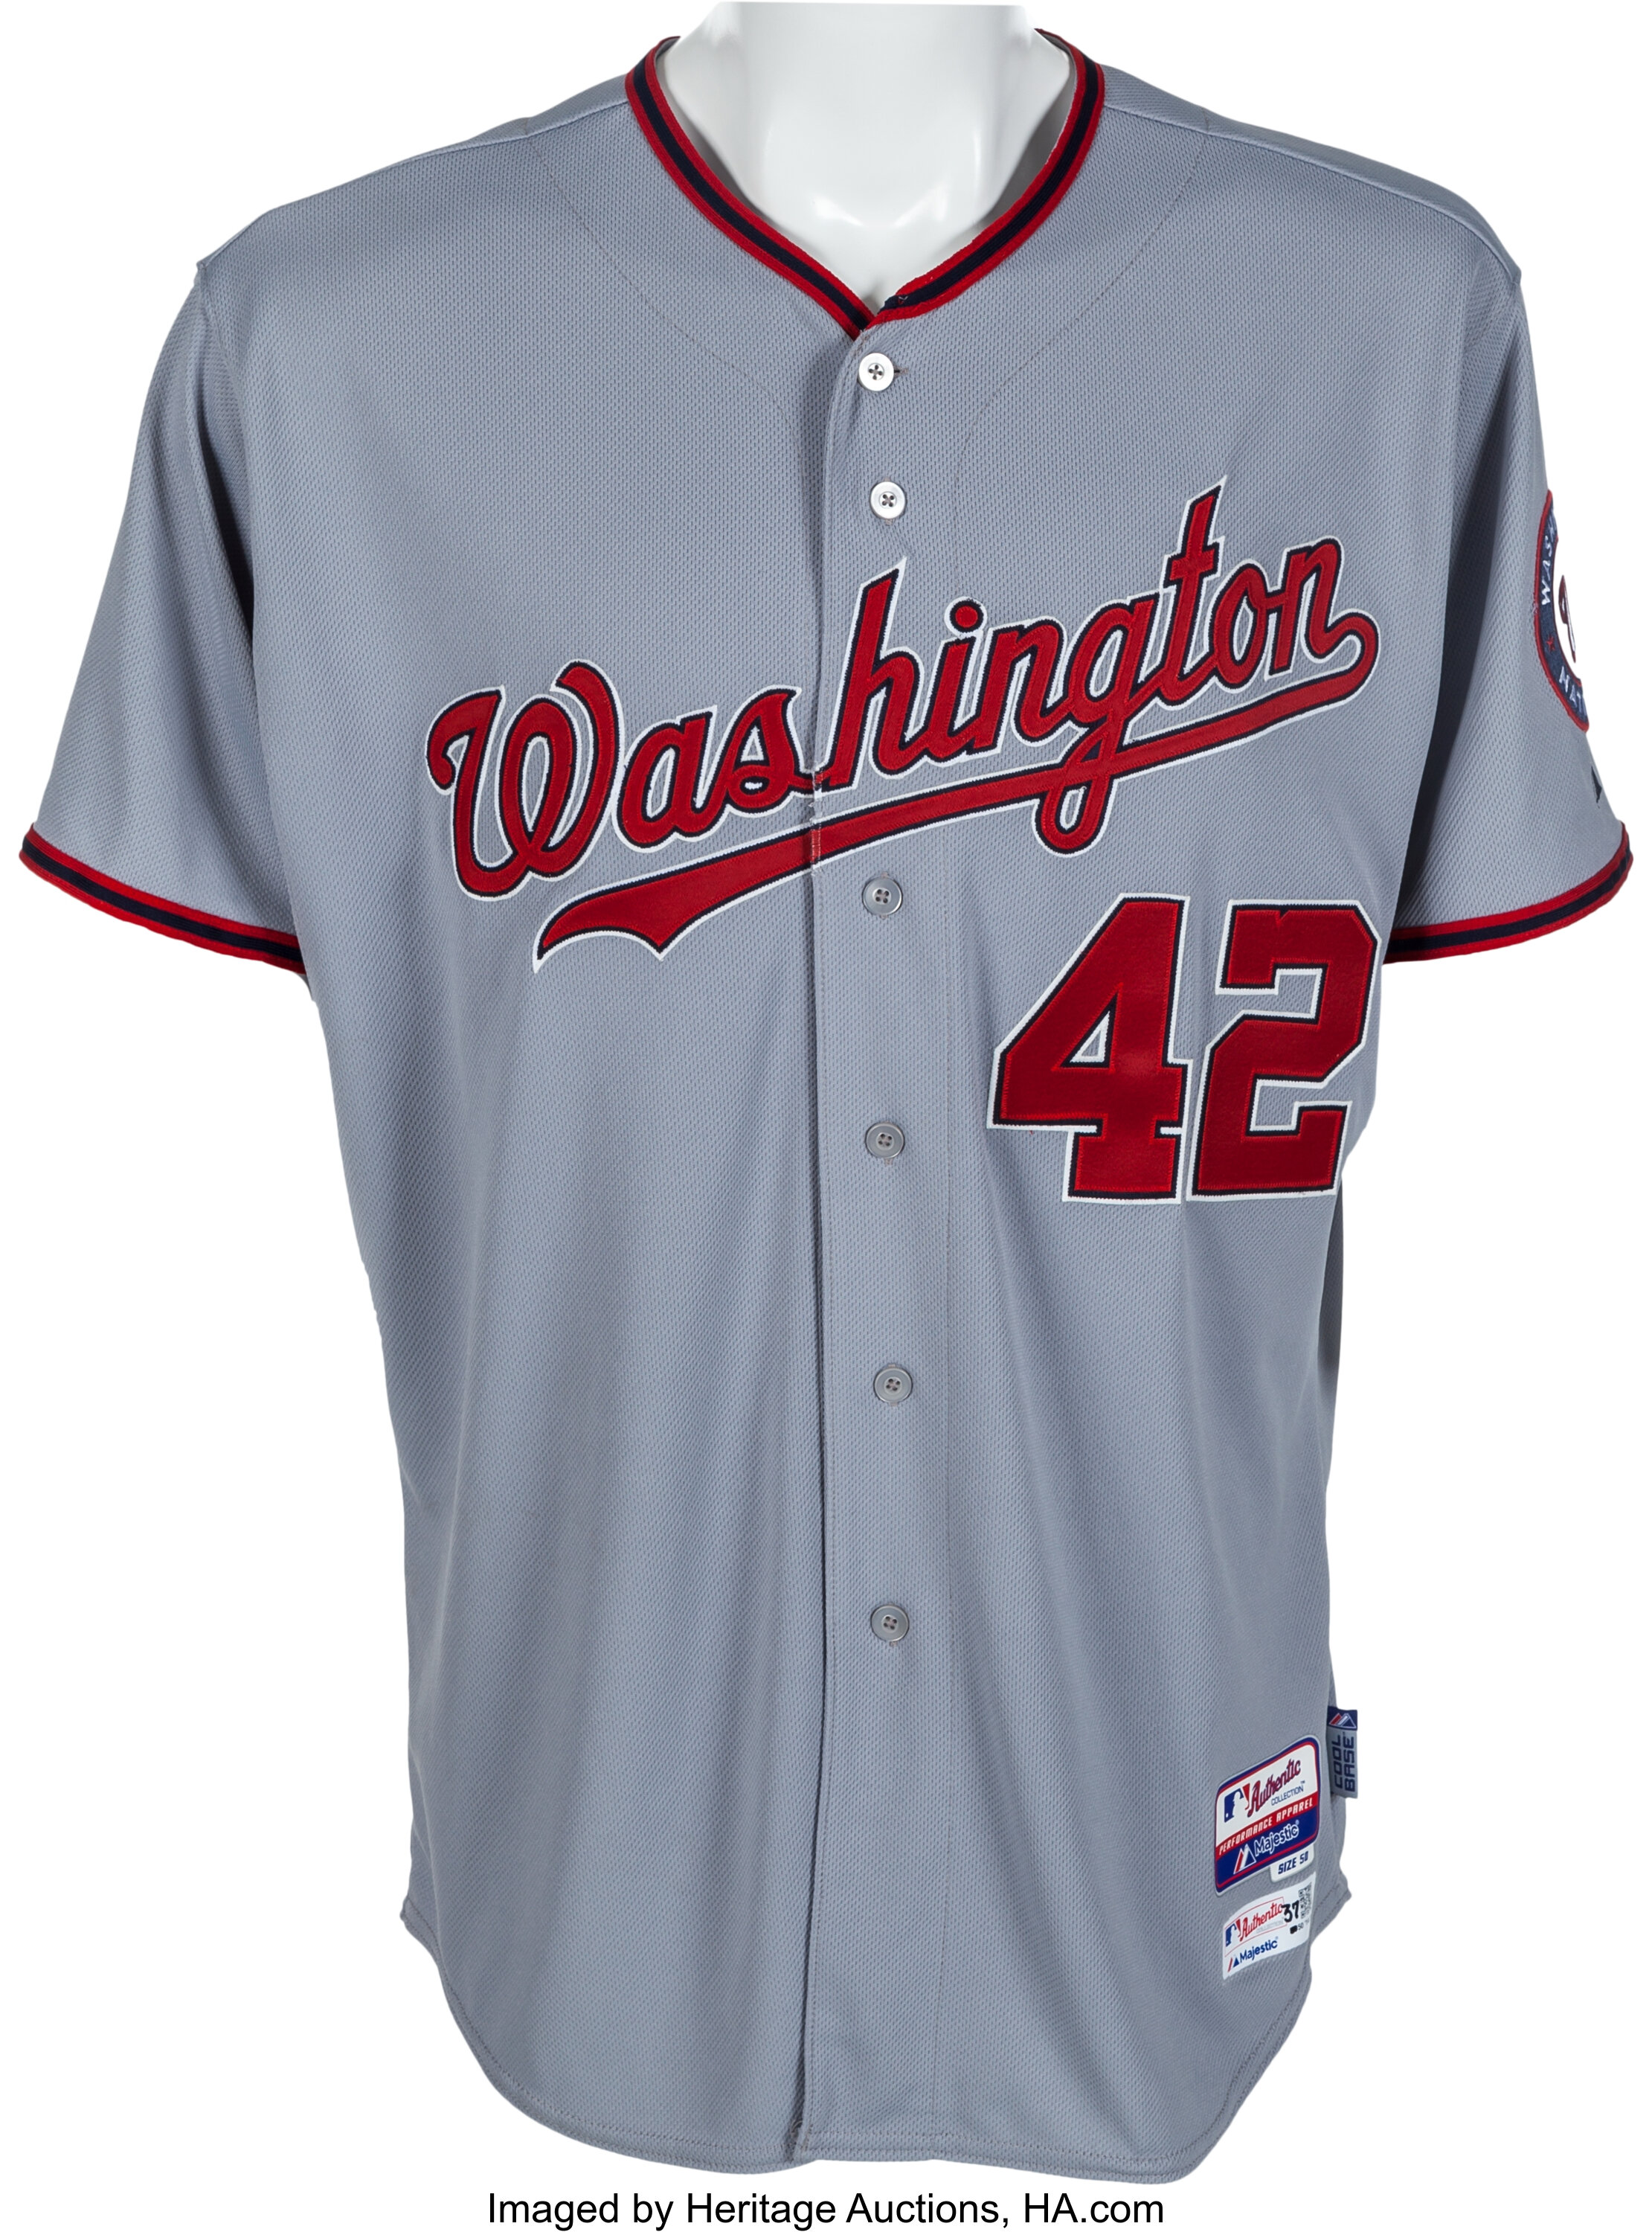 nationals opening day jersey